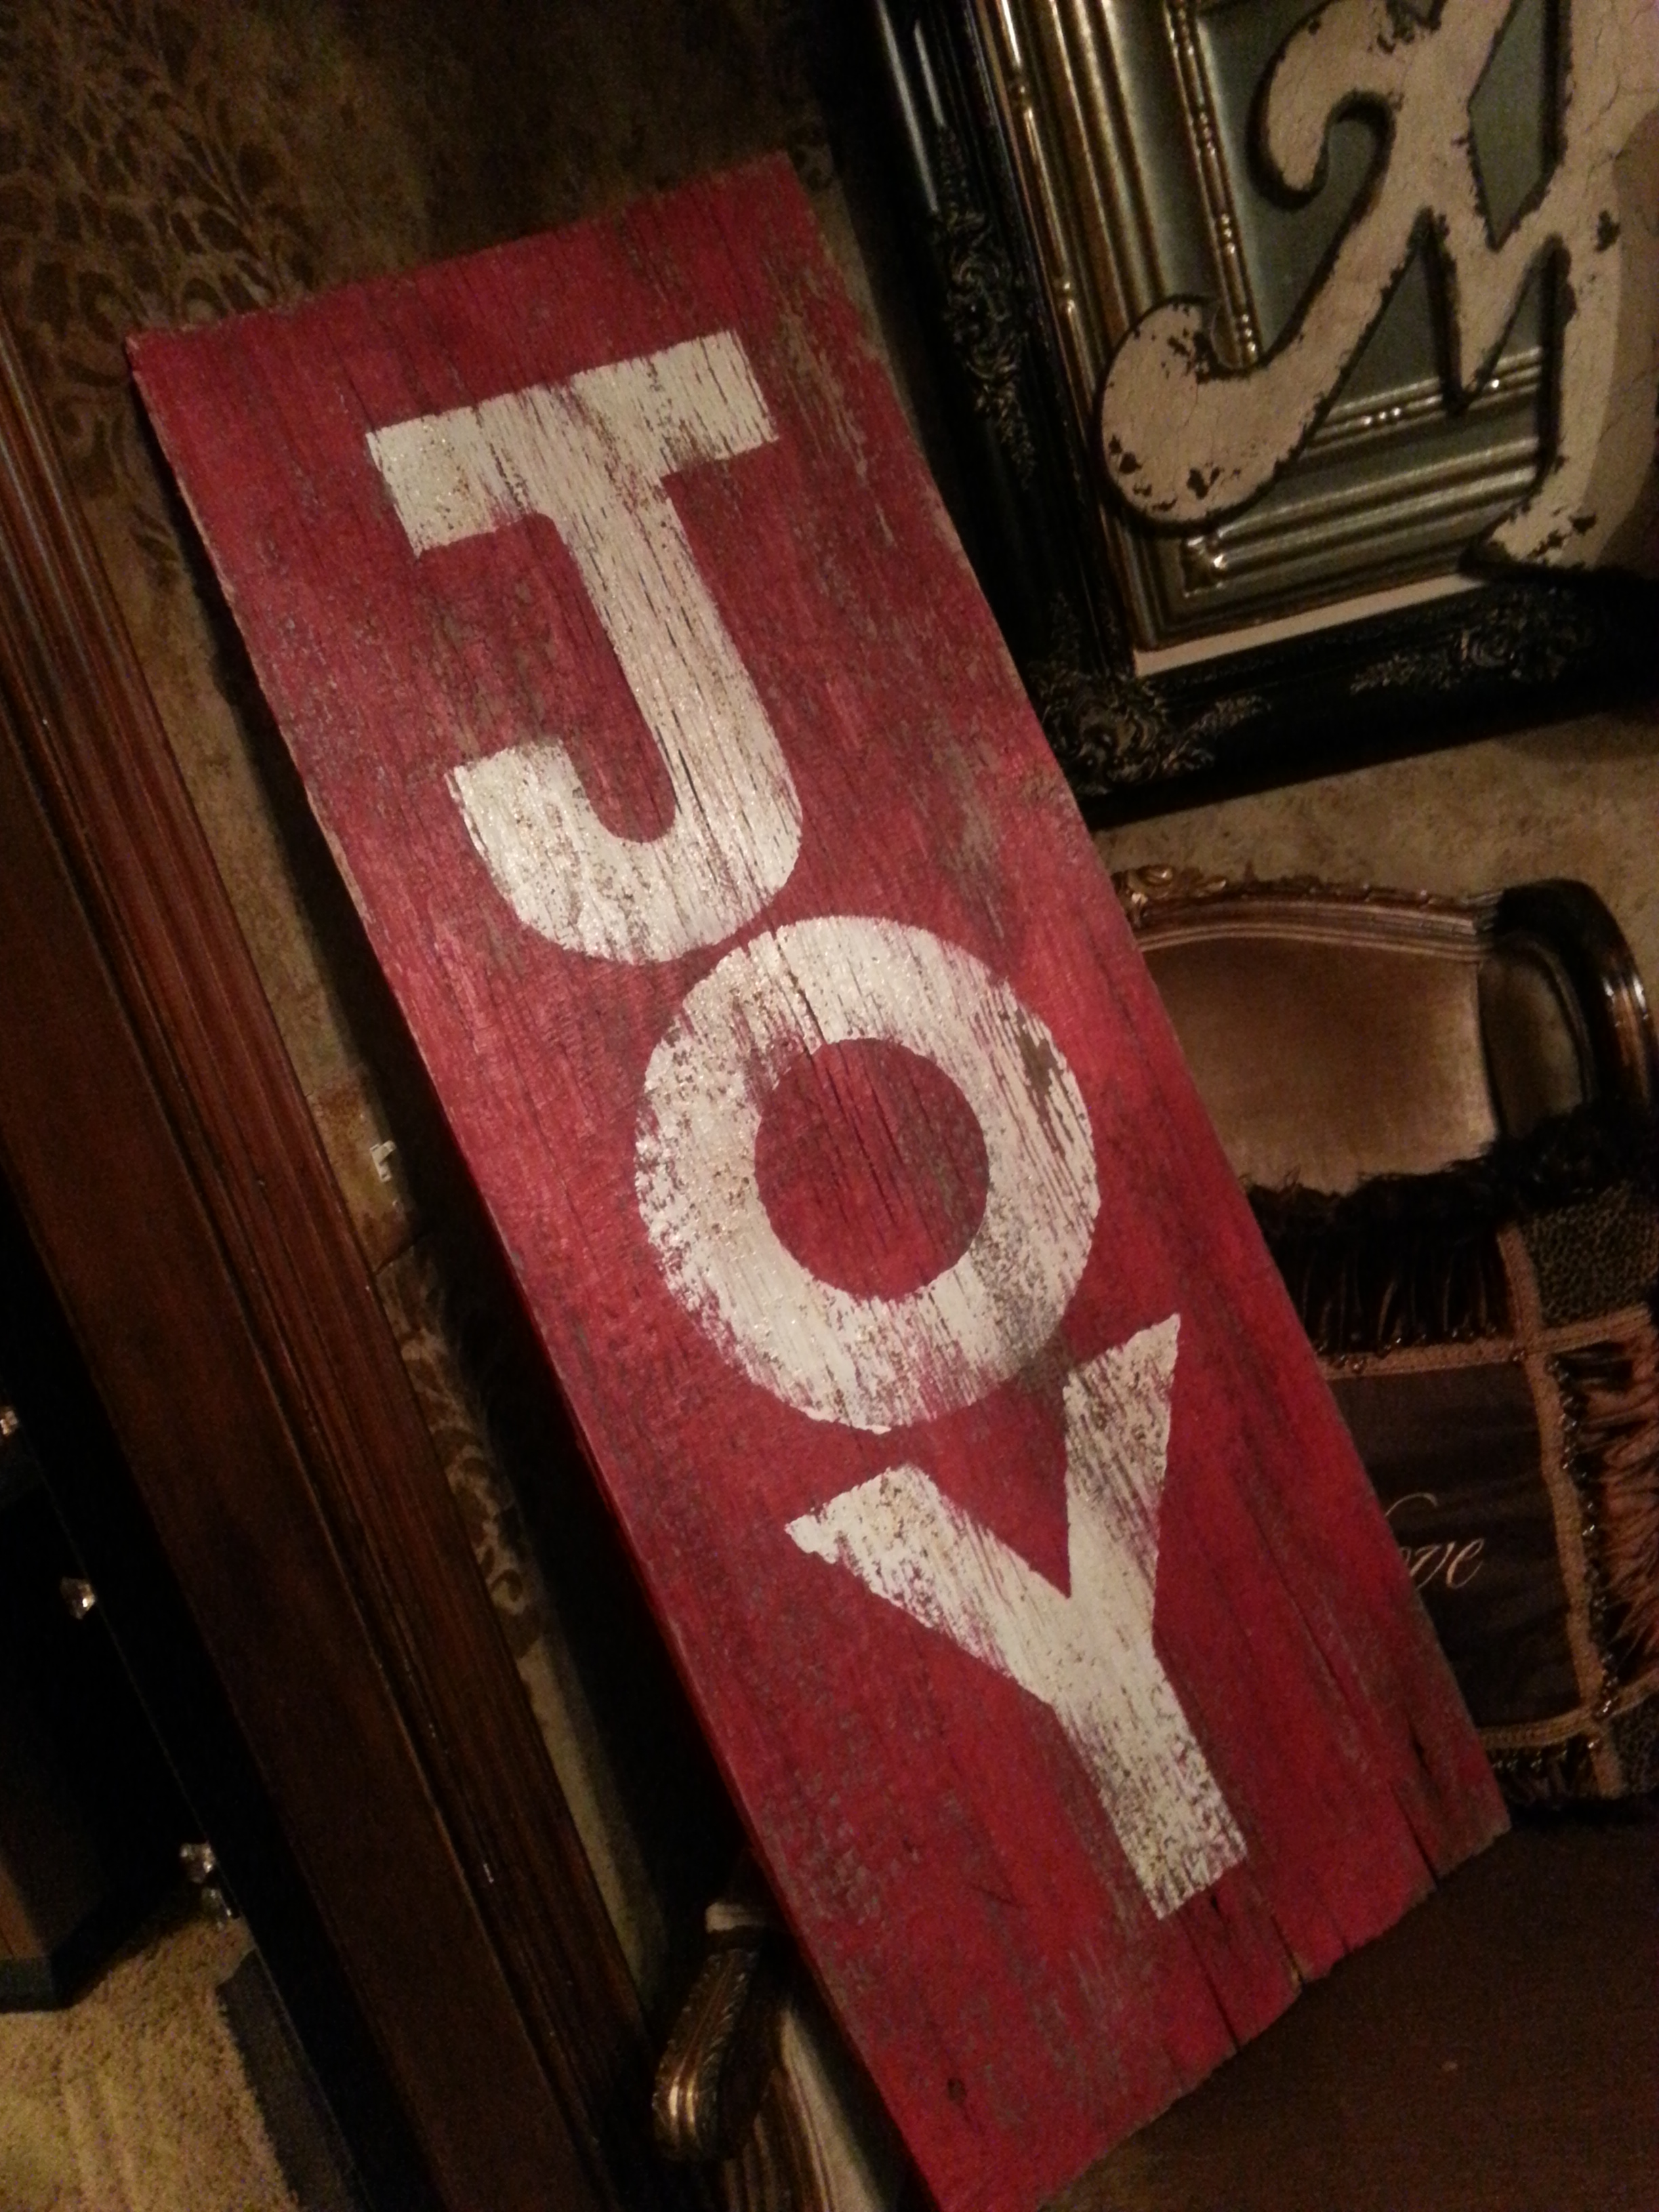 Hey, you still have time to make a Christmas sign out of barnwood